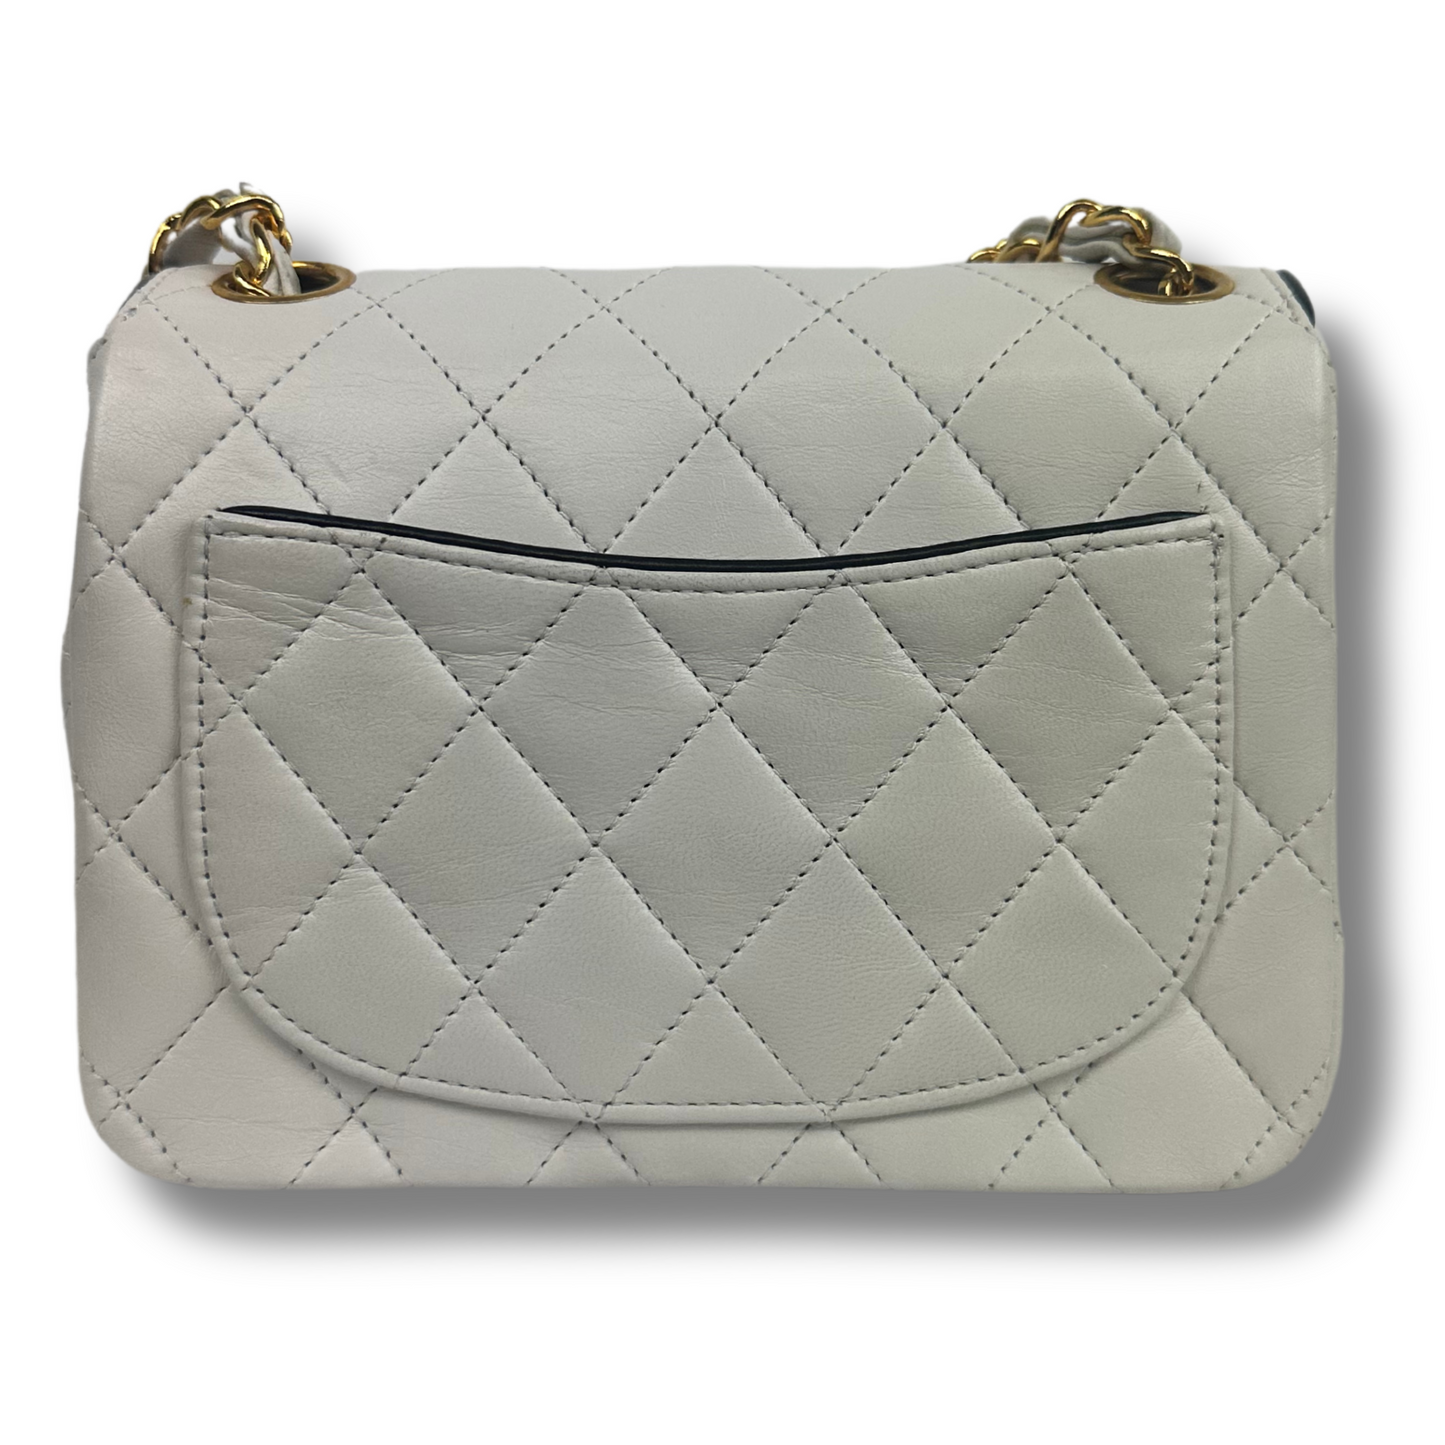 CHANEL White Lambskin Quilted Square Mini Flap Bag